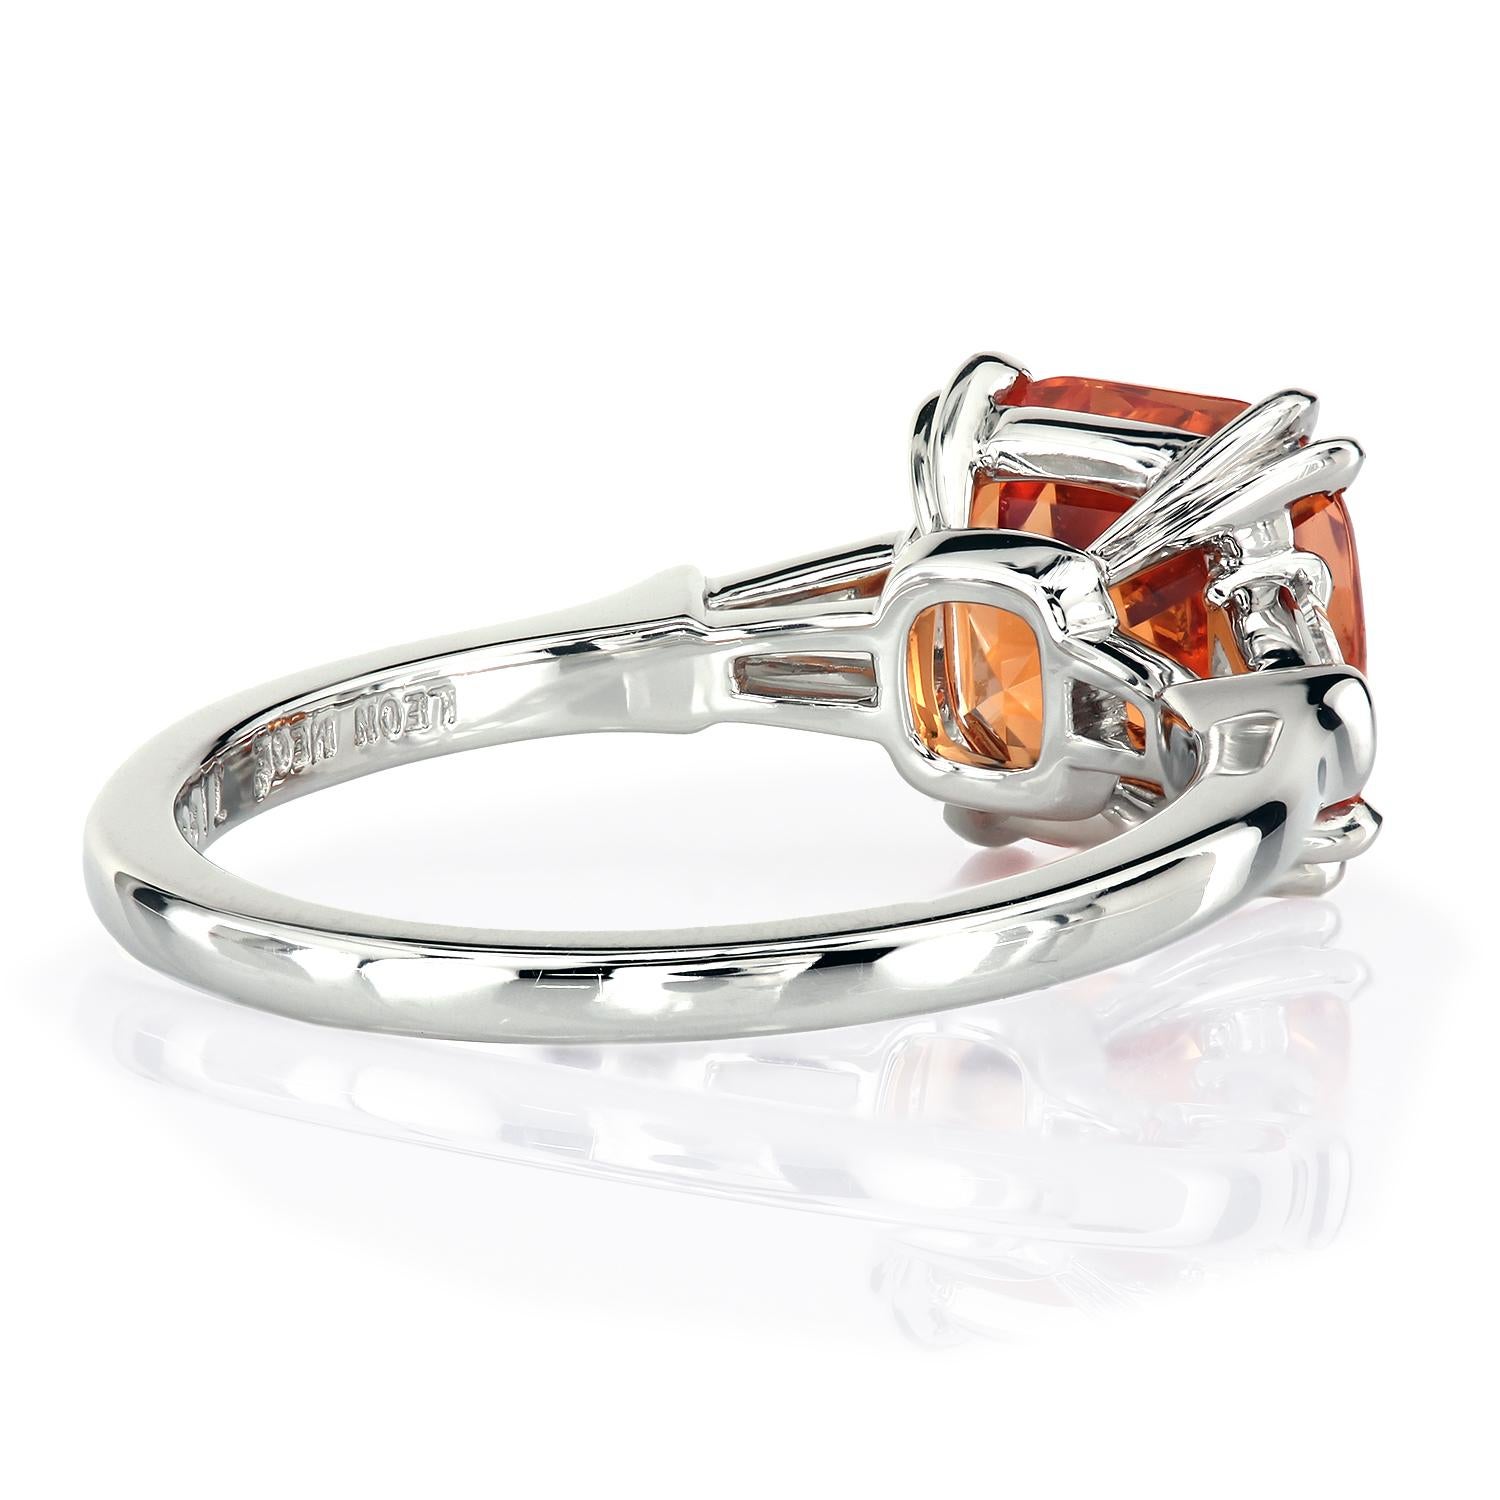 Classic platinum three-stone ring featuring a 3.44-carat cushion Mandarin garnet.
The vibrant orange stone is held with double claw prongs and is flanked by a pair of tapered diamond baguettes, 0.25 ct total weight, G-H/VS
